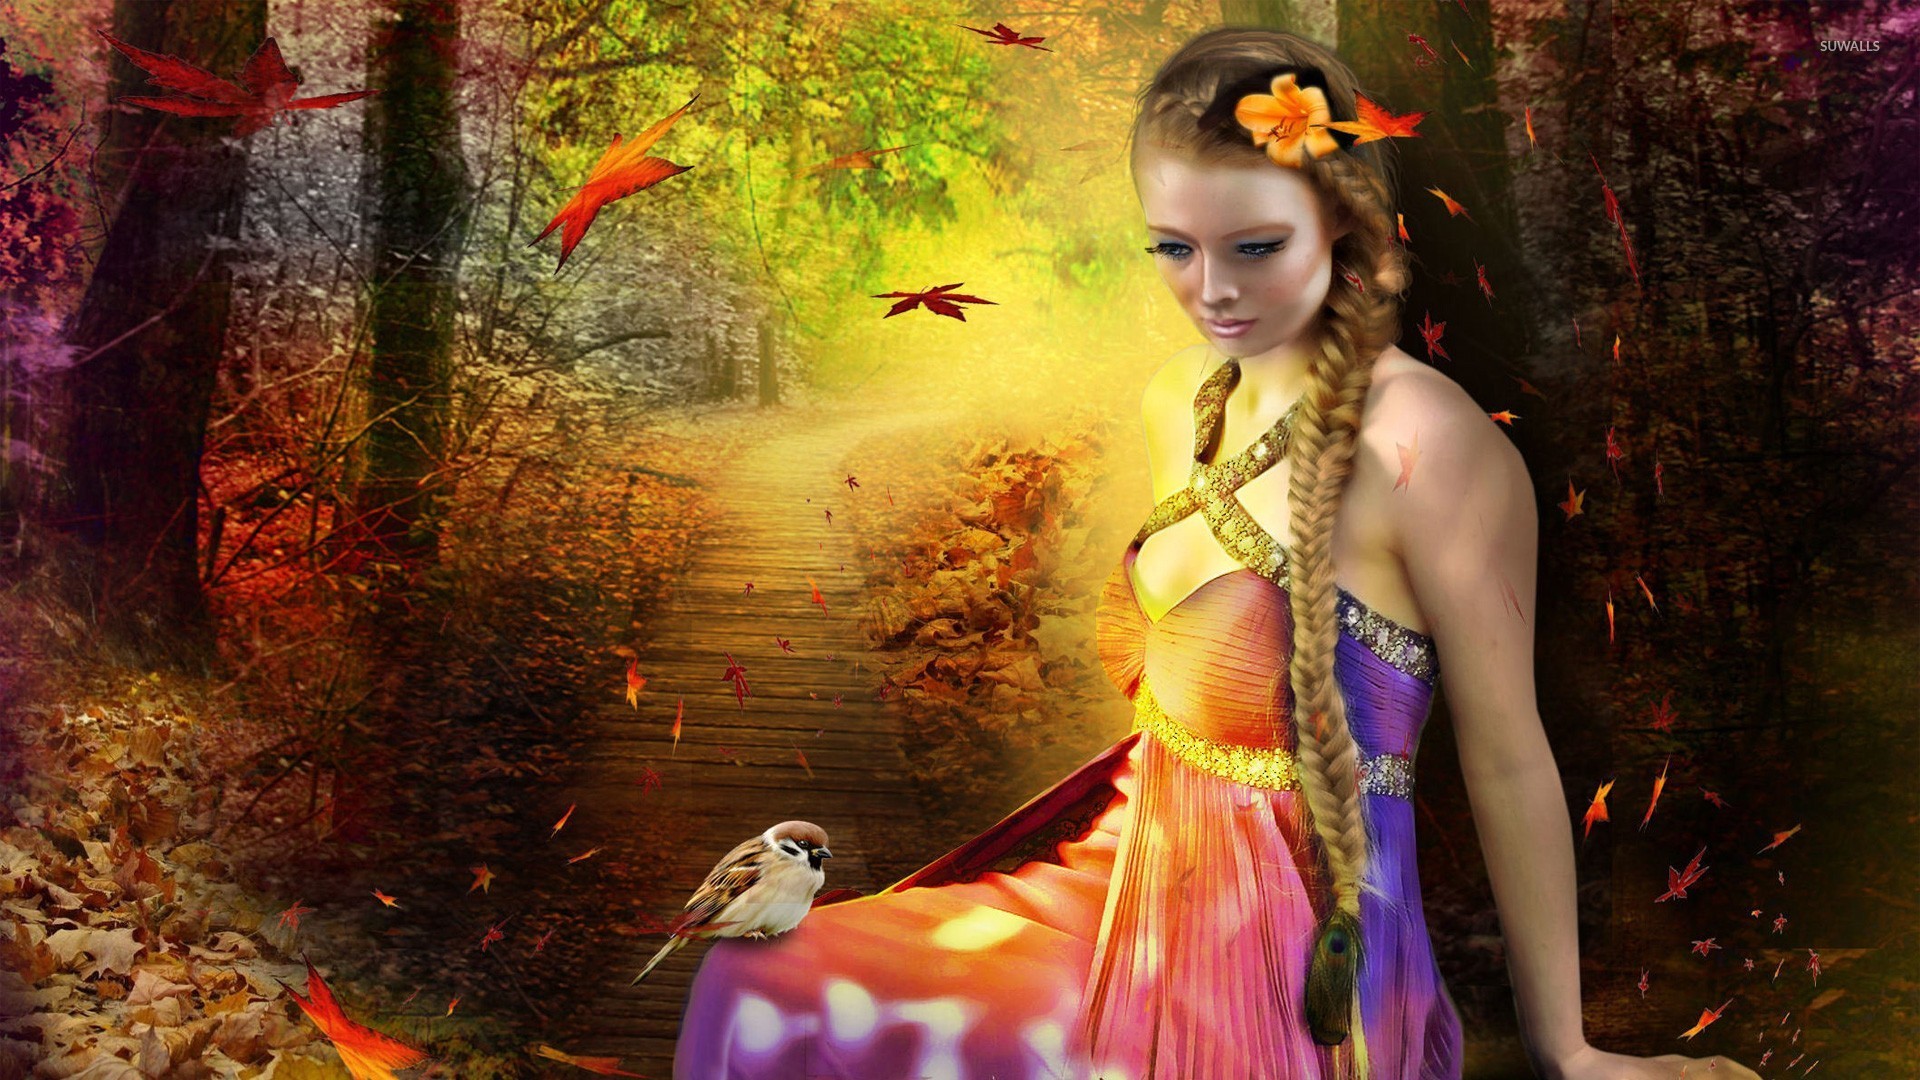 Forest fairy [2] wallpaper - Fantasy wallpapers - #24921